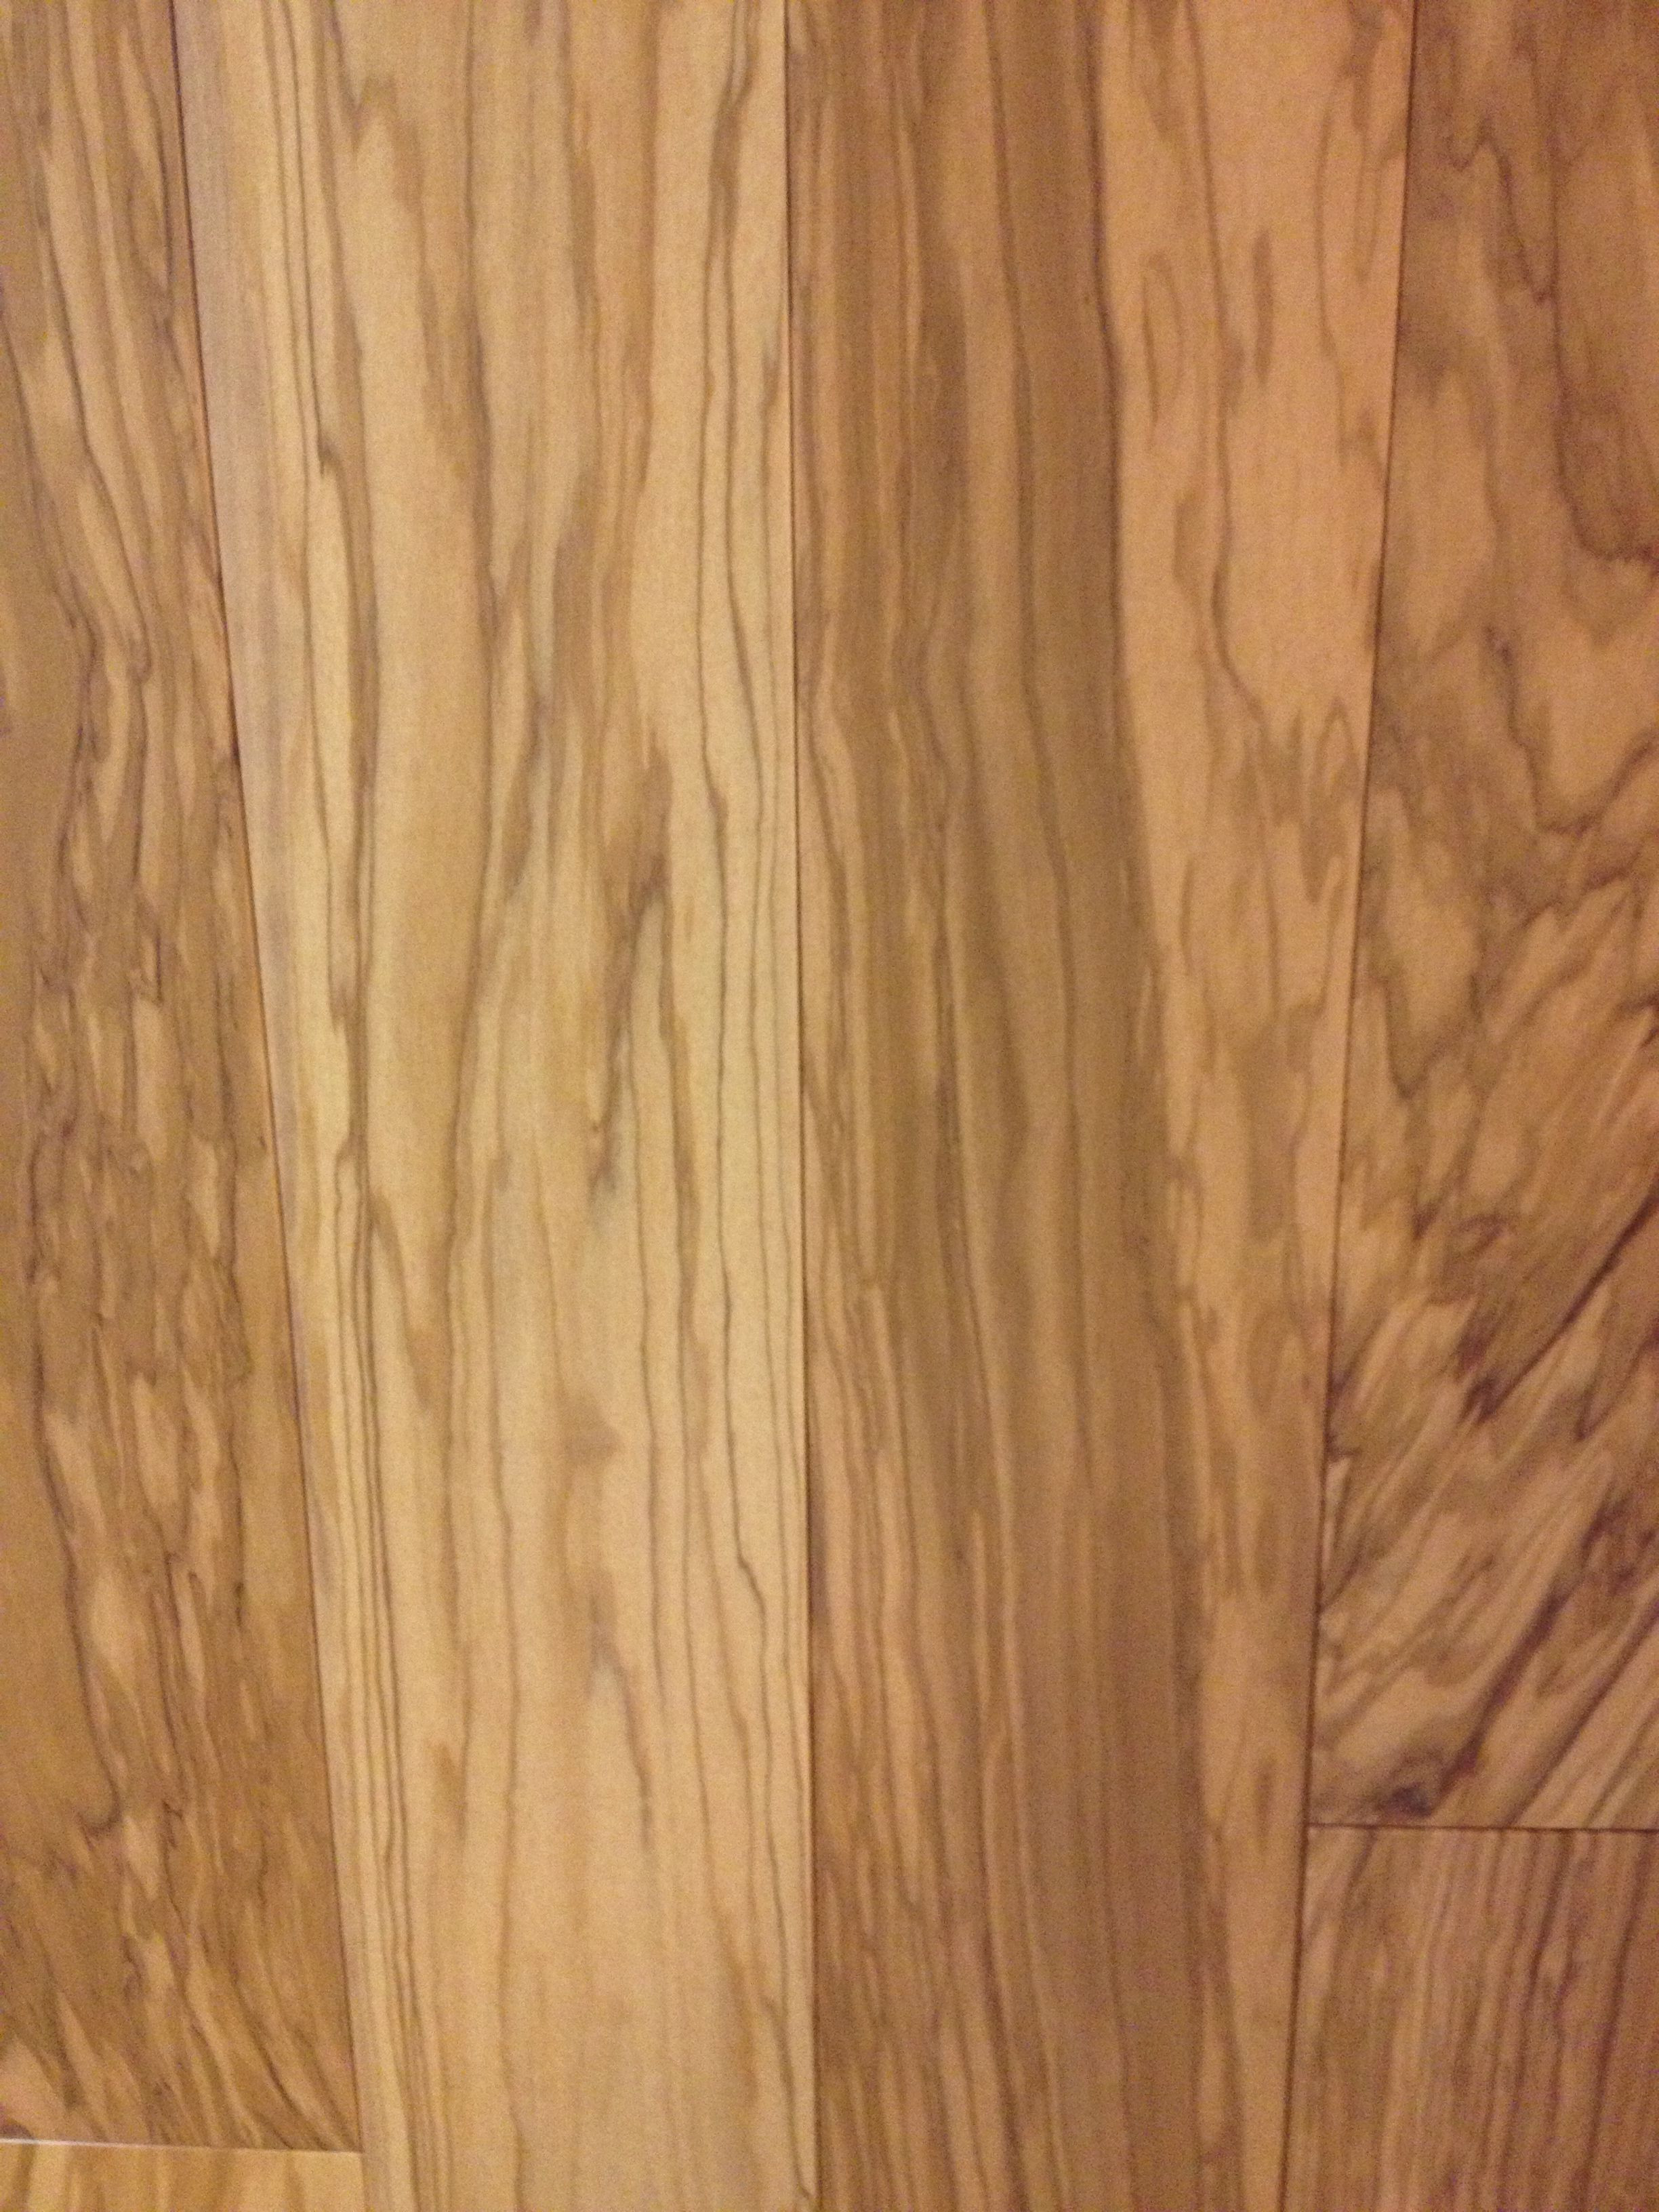 16 Unique Prefinished Hardwood Flooring Price Per Square Foot Installed 2024 free download prefinished hardwood flooring price per square foot installed of tuscany olive wood floor there is nothing quite like olive wood for pertaining to tuscany olive wood floor there is nothing q